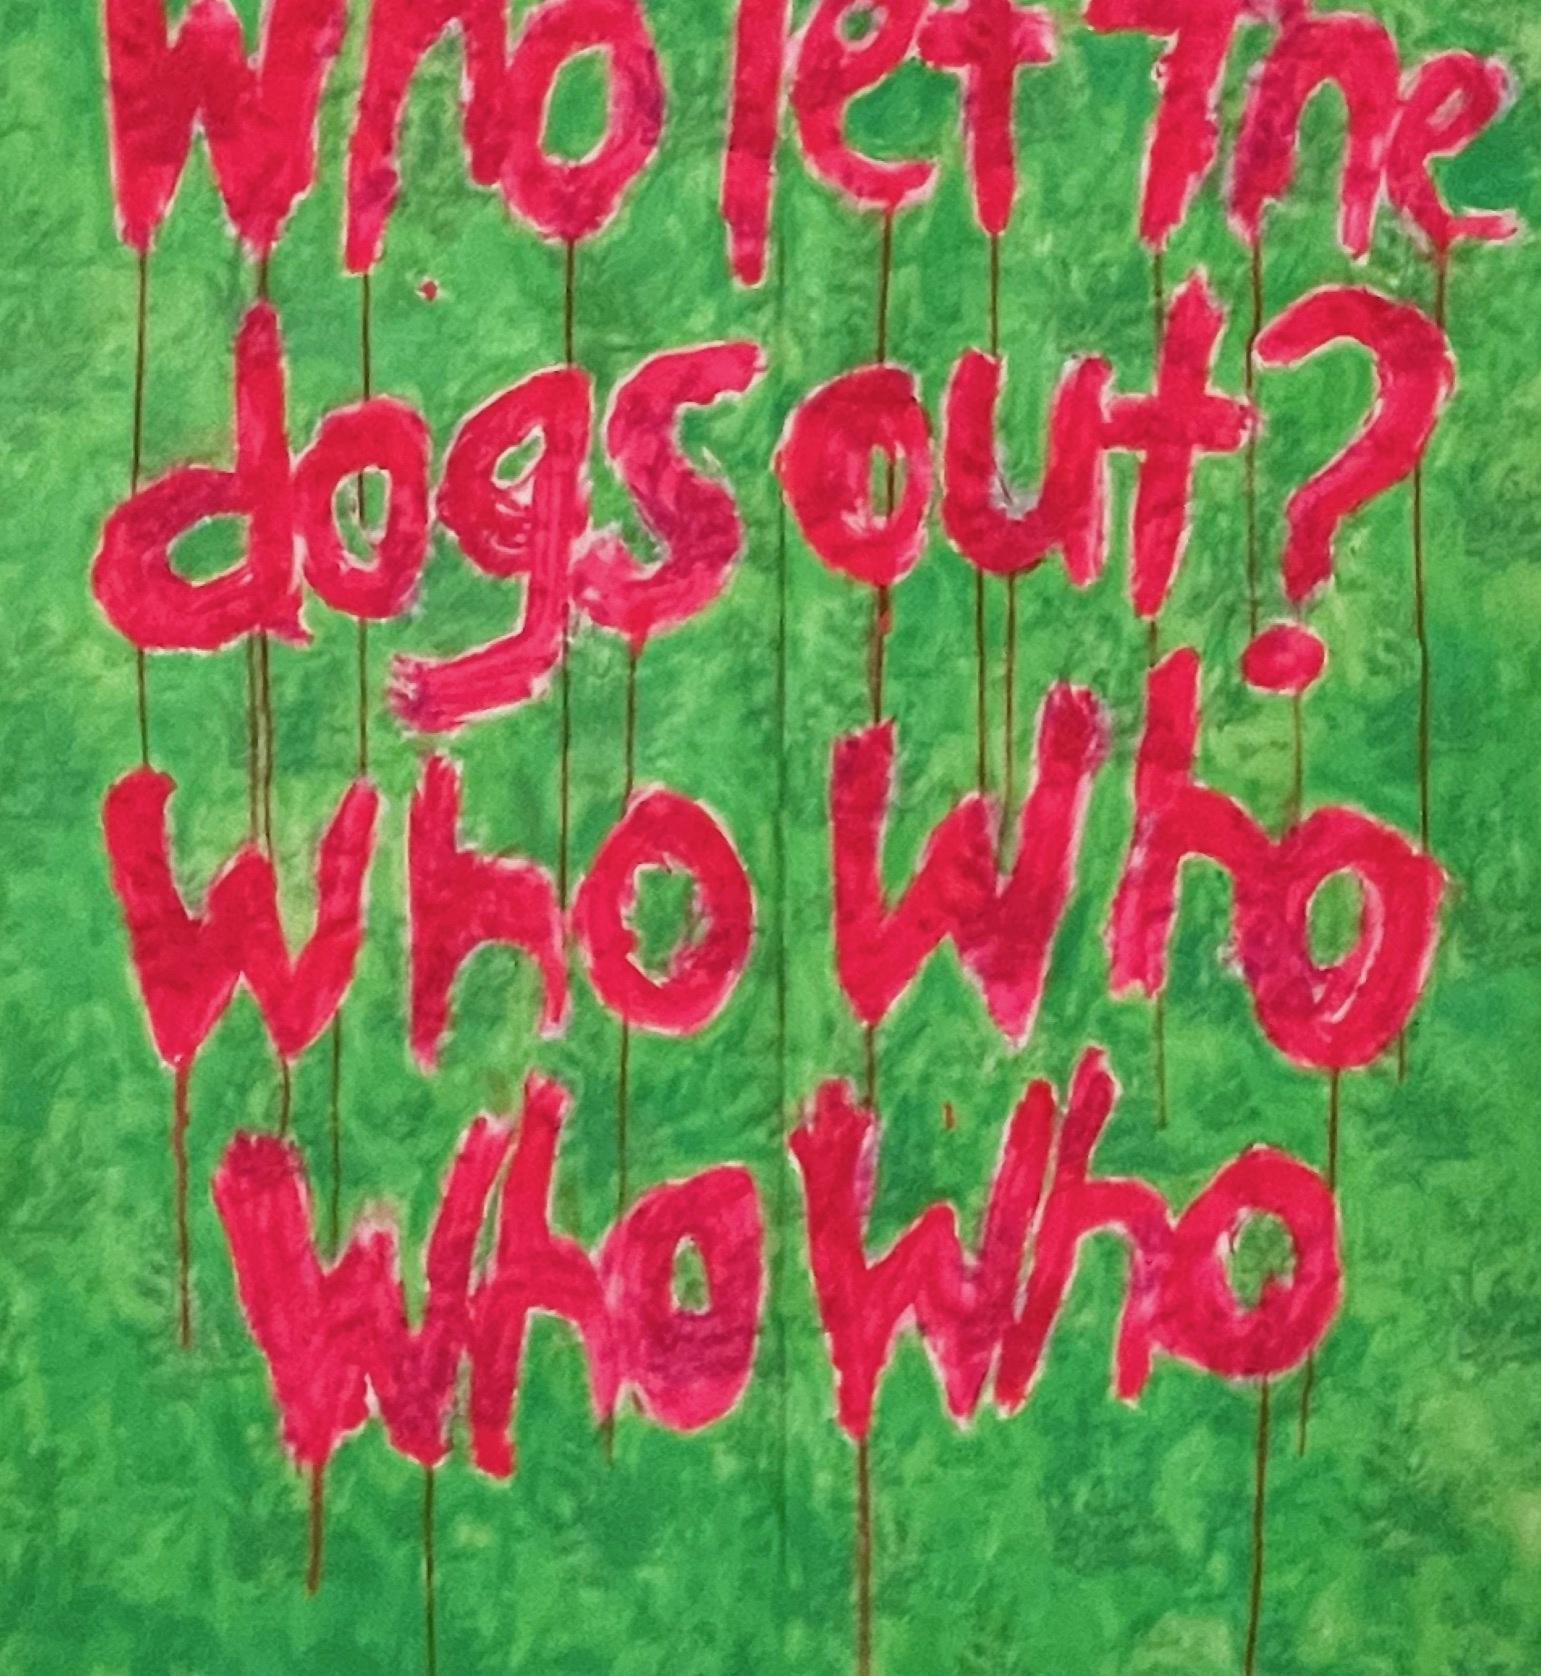 Who Let the Dogs Out - Art by Ayse Wilson